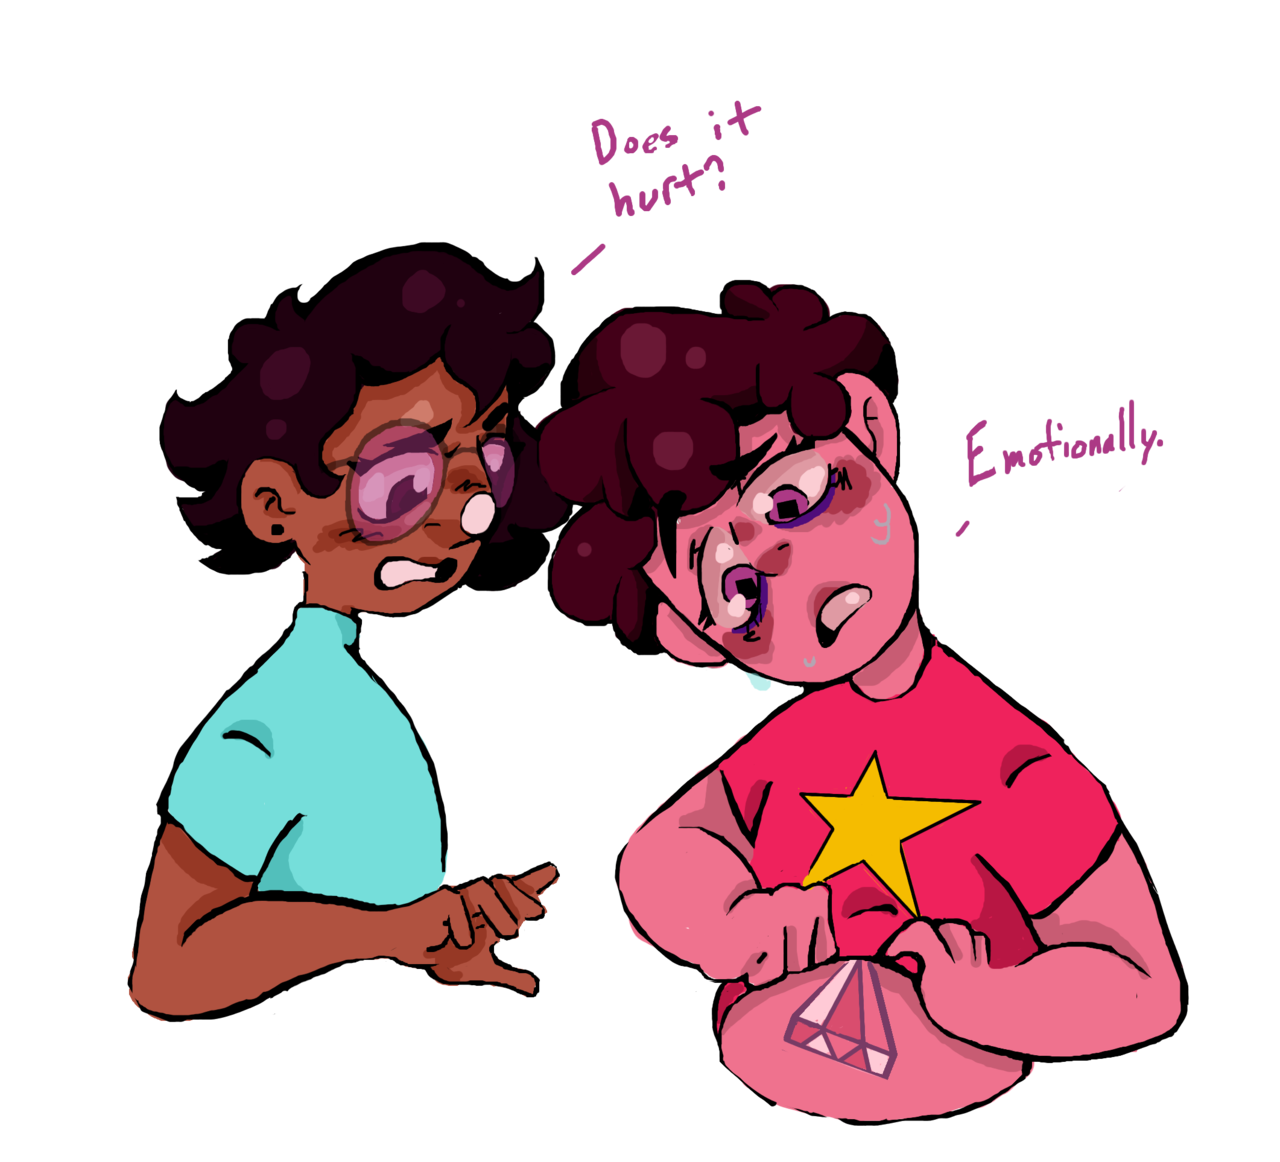 Connie’s new design is so cute js